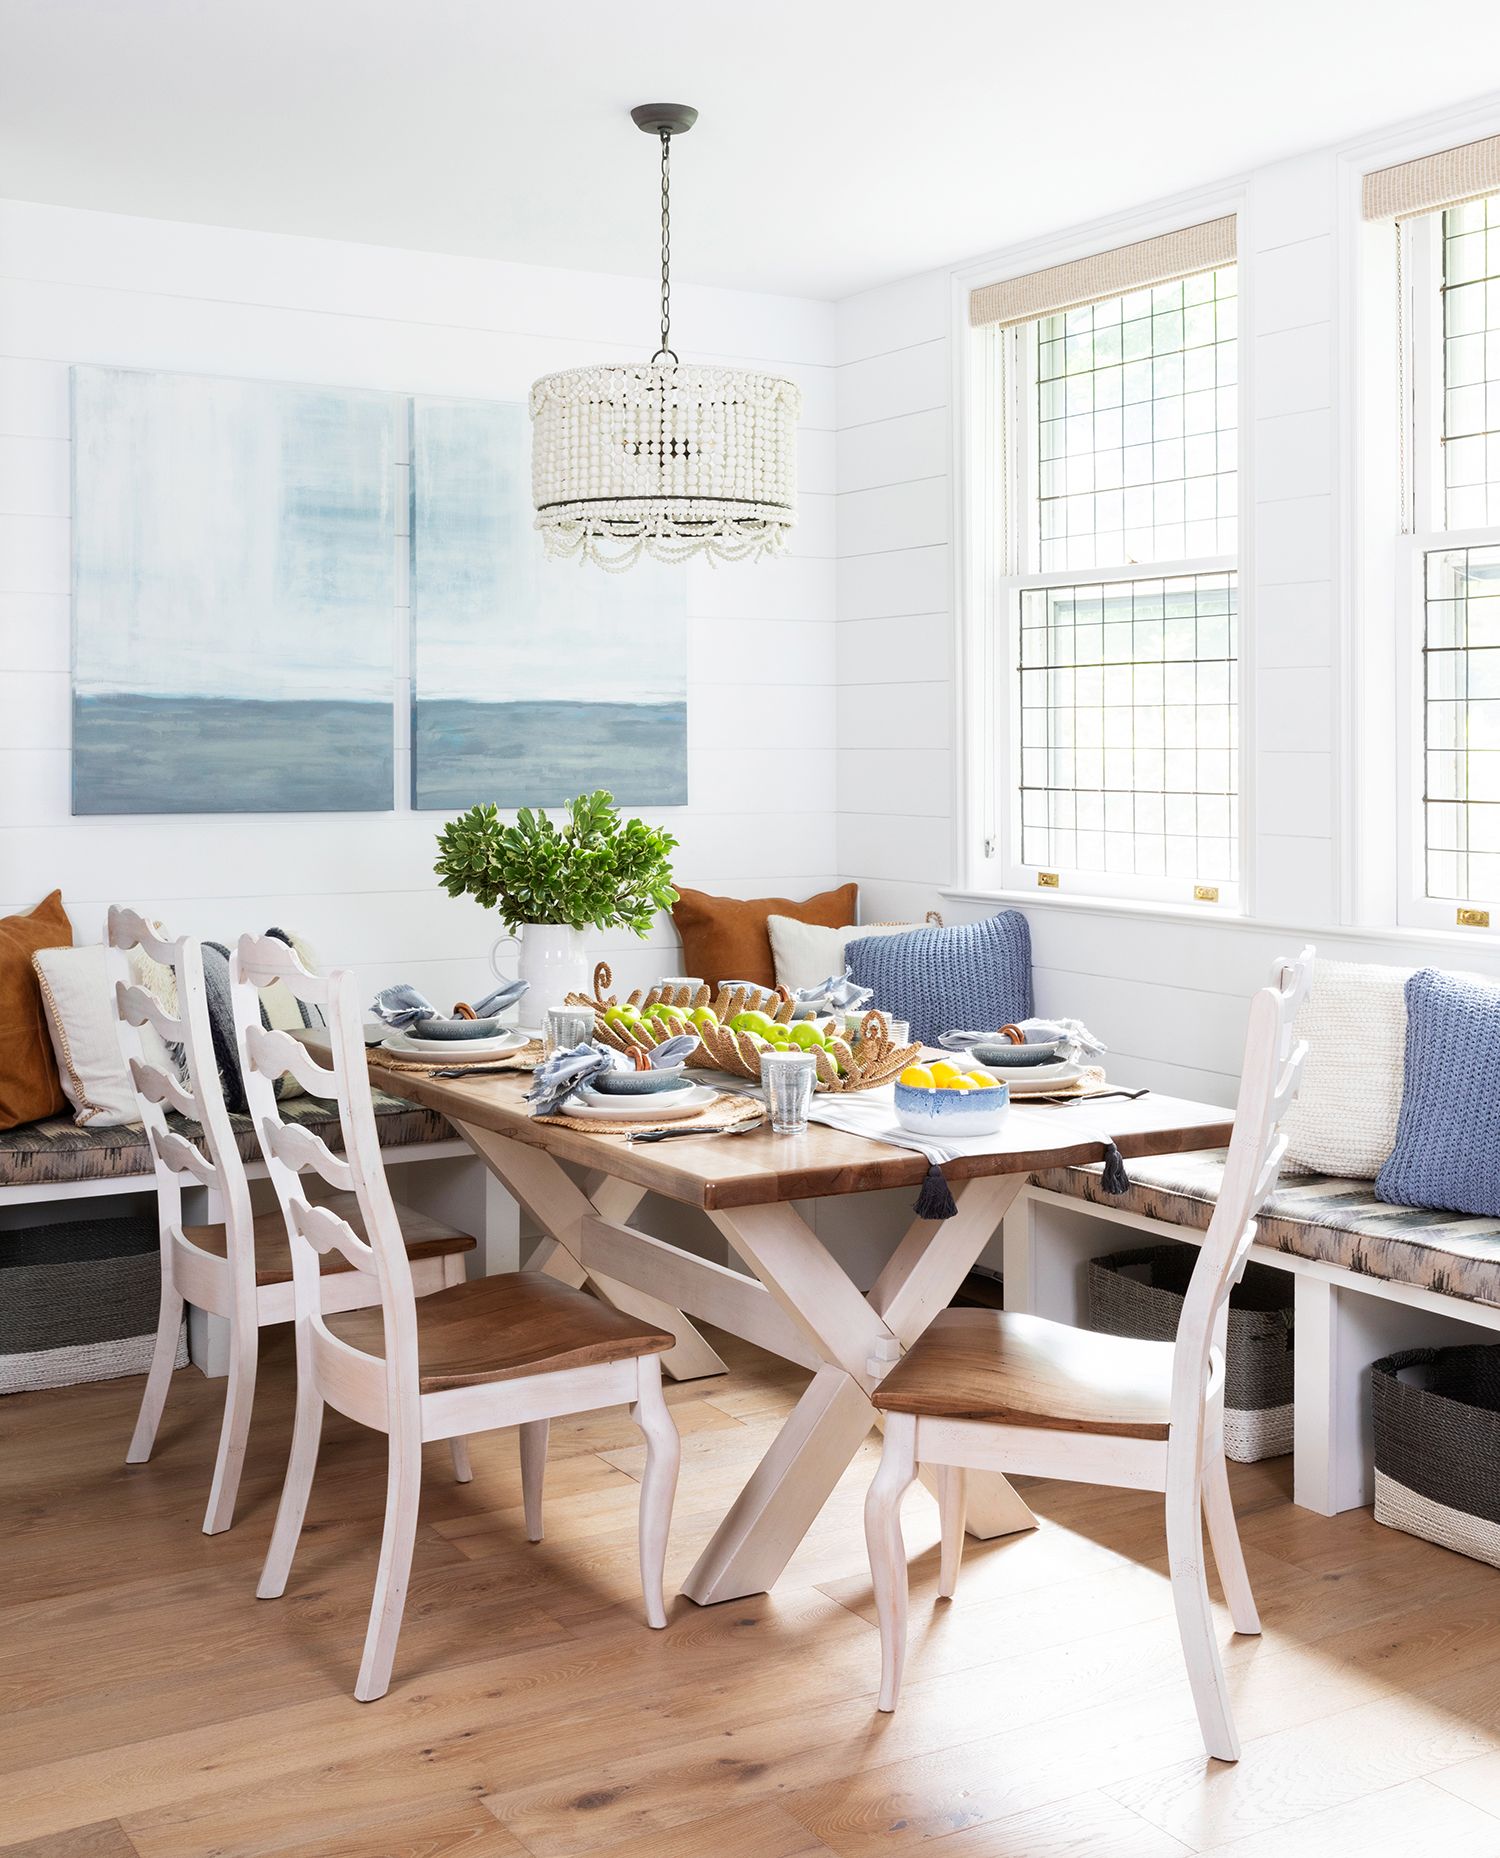 How to Choose a Dining Table